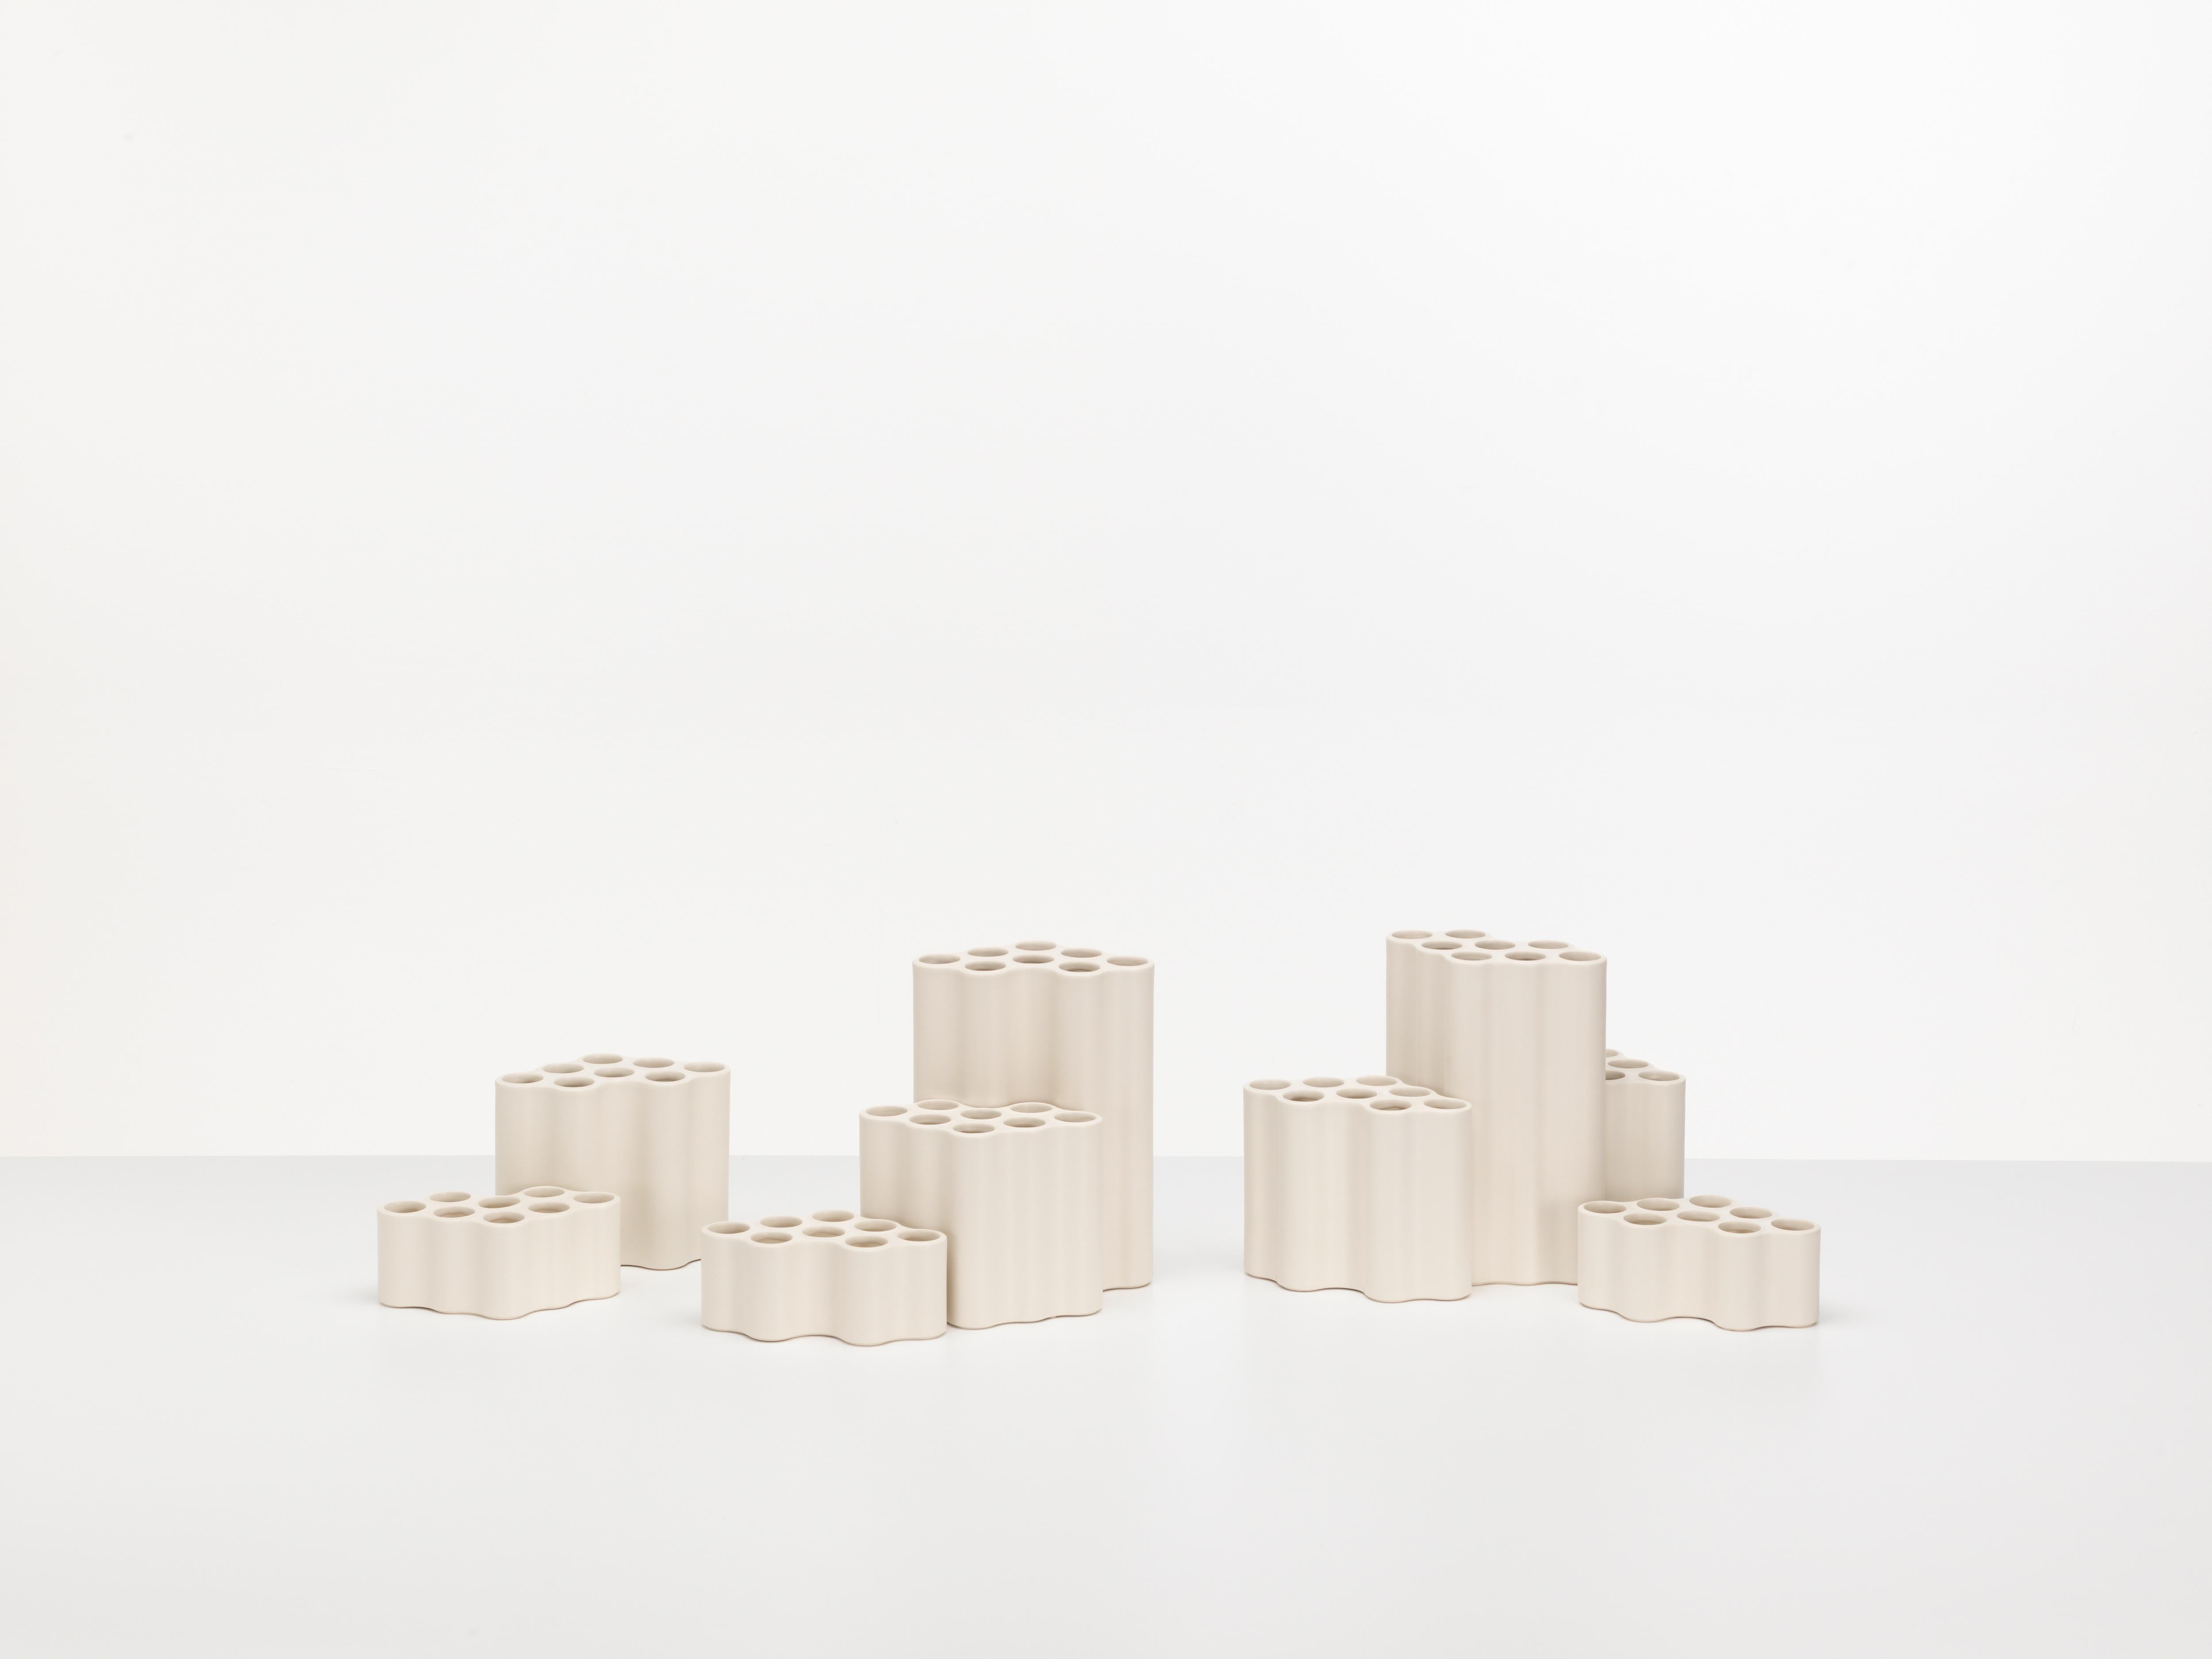 Vitra Small Nuage Céramique Vase in White by Ronan & Erwan Bouroullec (Moderne) im Angebot